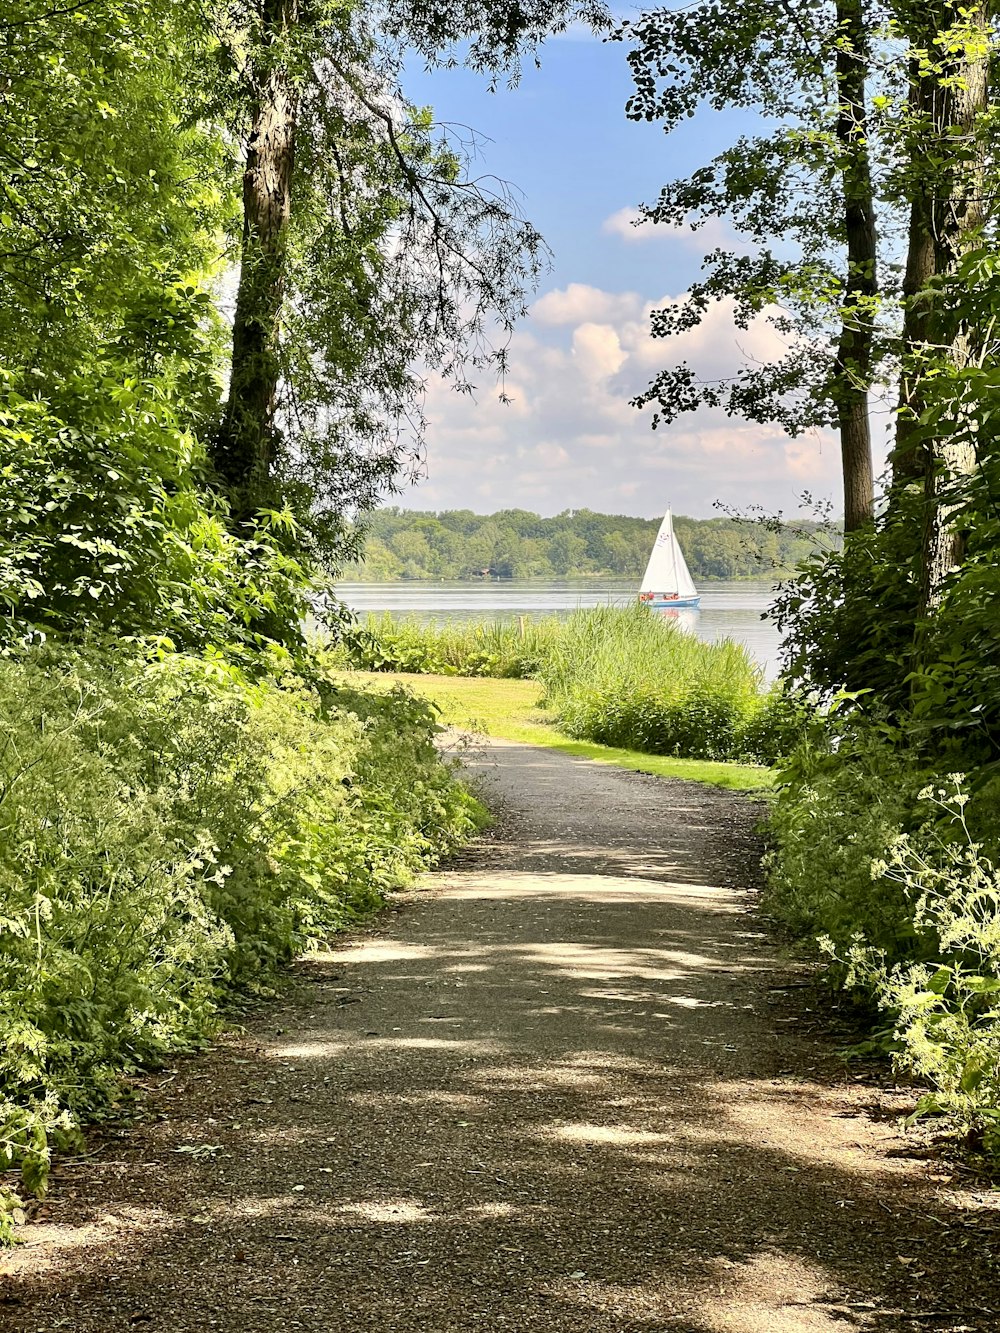 a path with trees and a sailboat in the distance